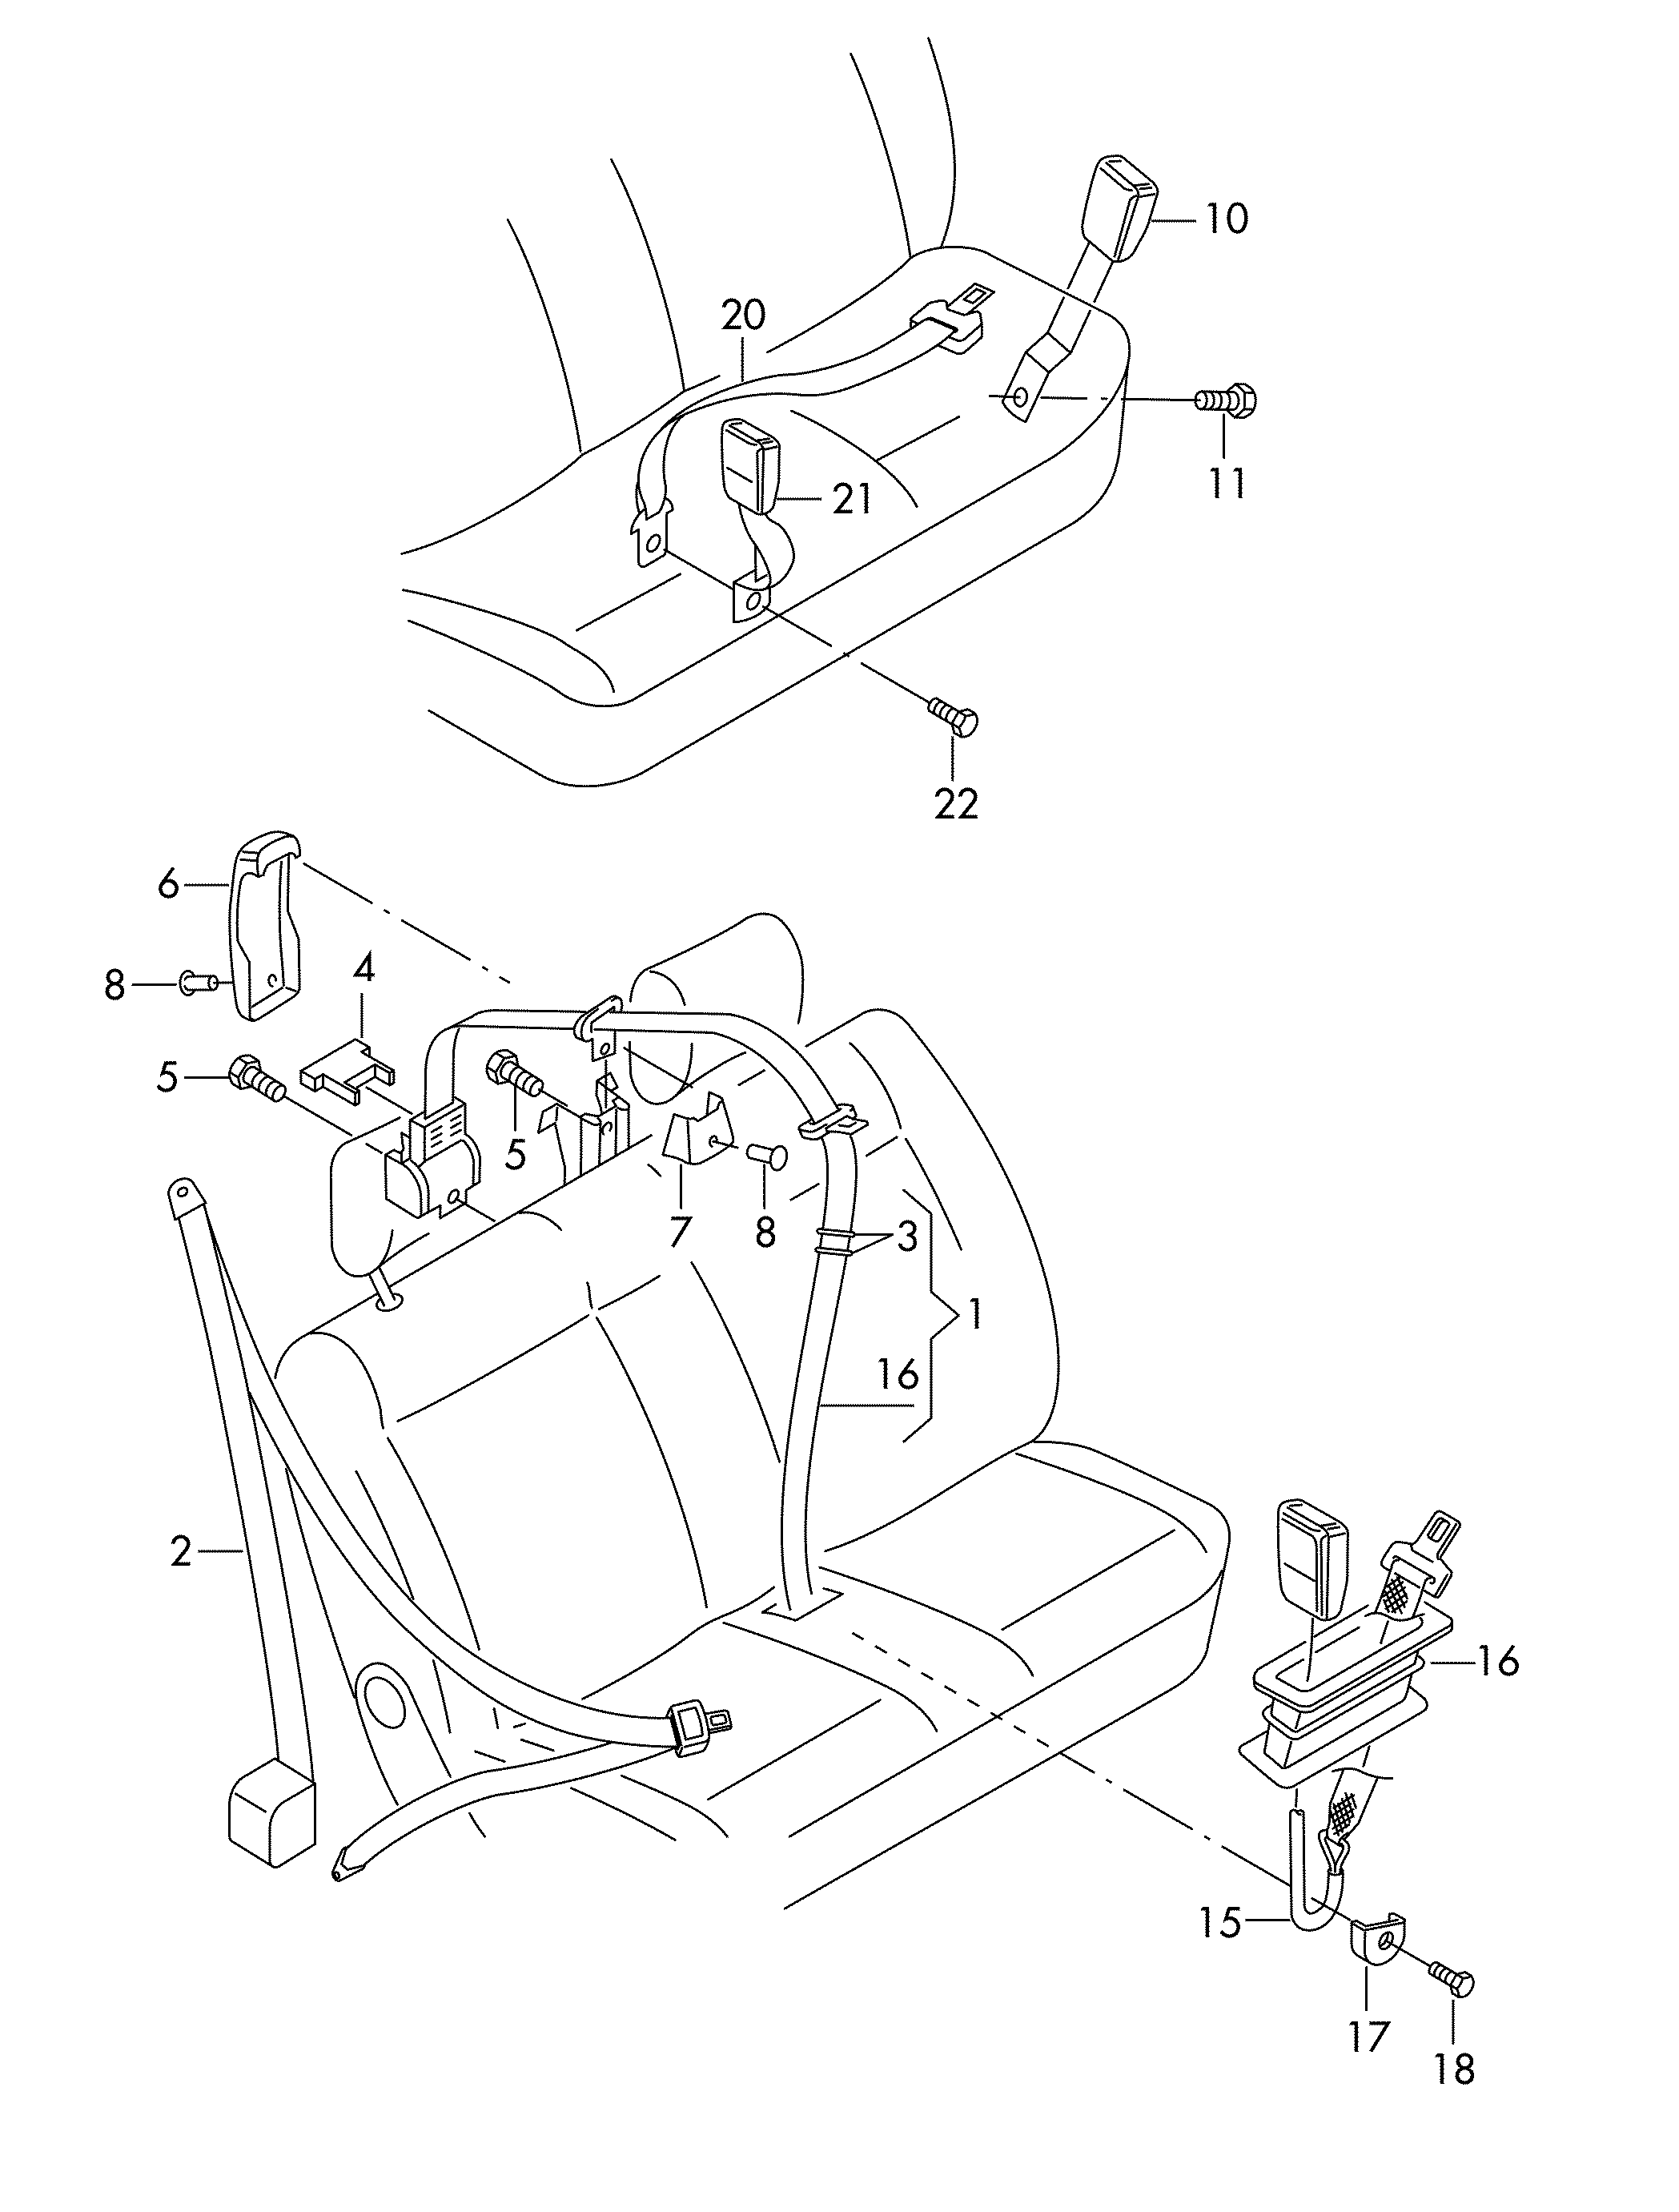 seat belts in<br>cab<br>for dual passenger seat<br> F 70-W-071 081>> center - Transporter syncro - trsy